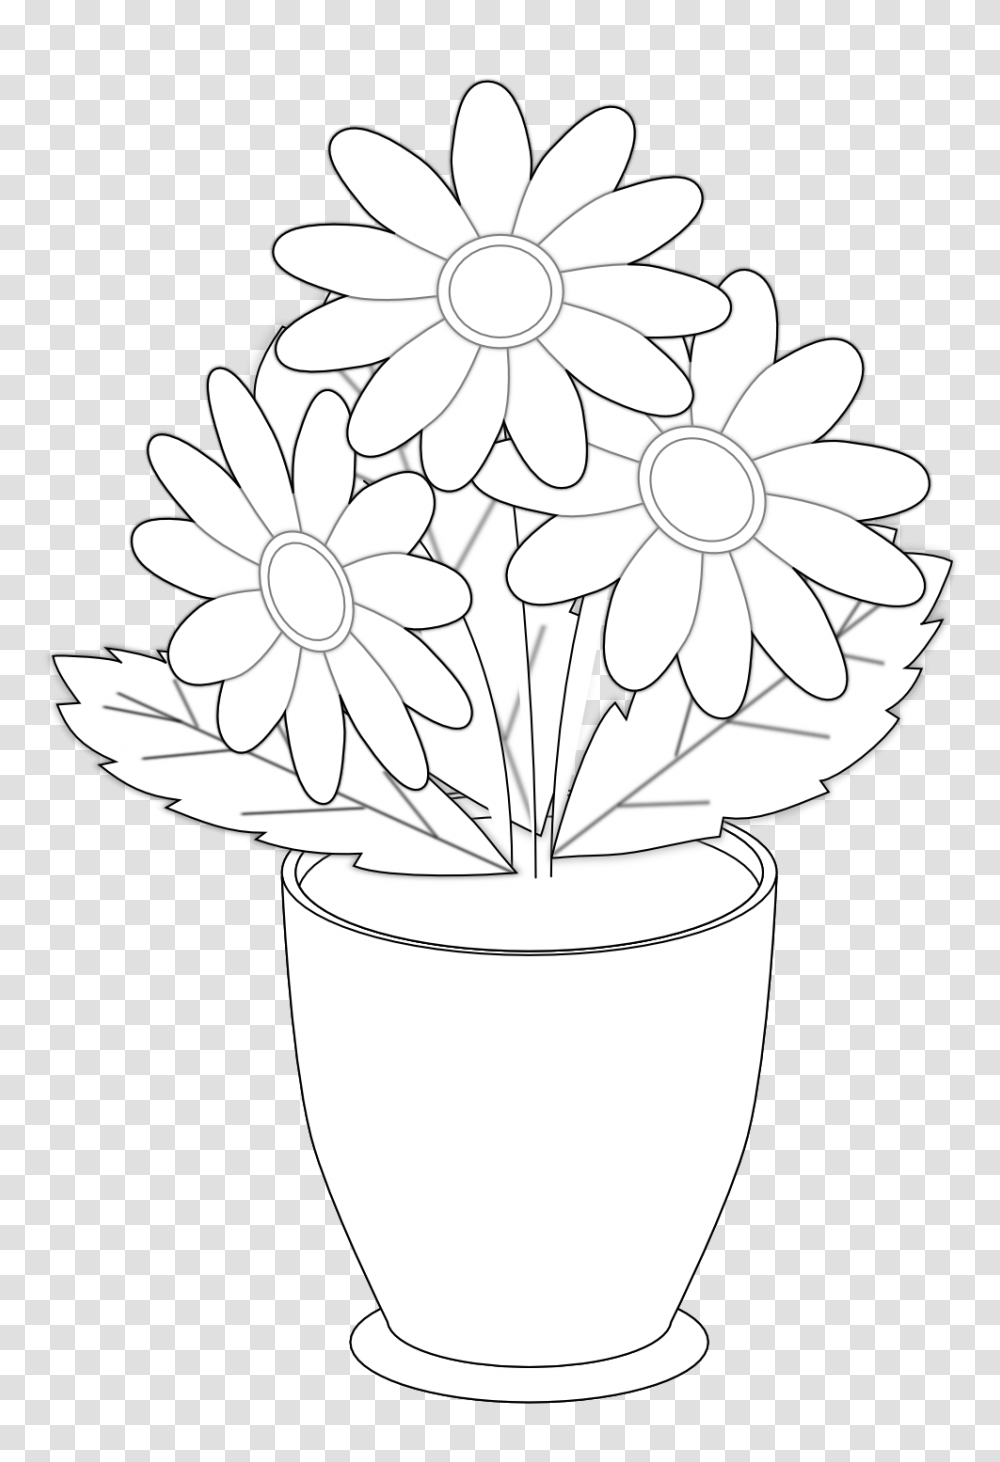 Vase Clipart Clip Art Draw The Flower Vases Download Flowers Clip Art Black And White, Plant, Blossom, Daisy, Daisies Transparent Png